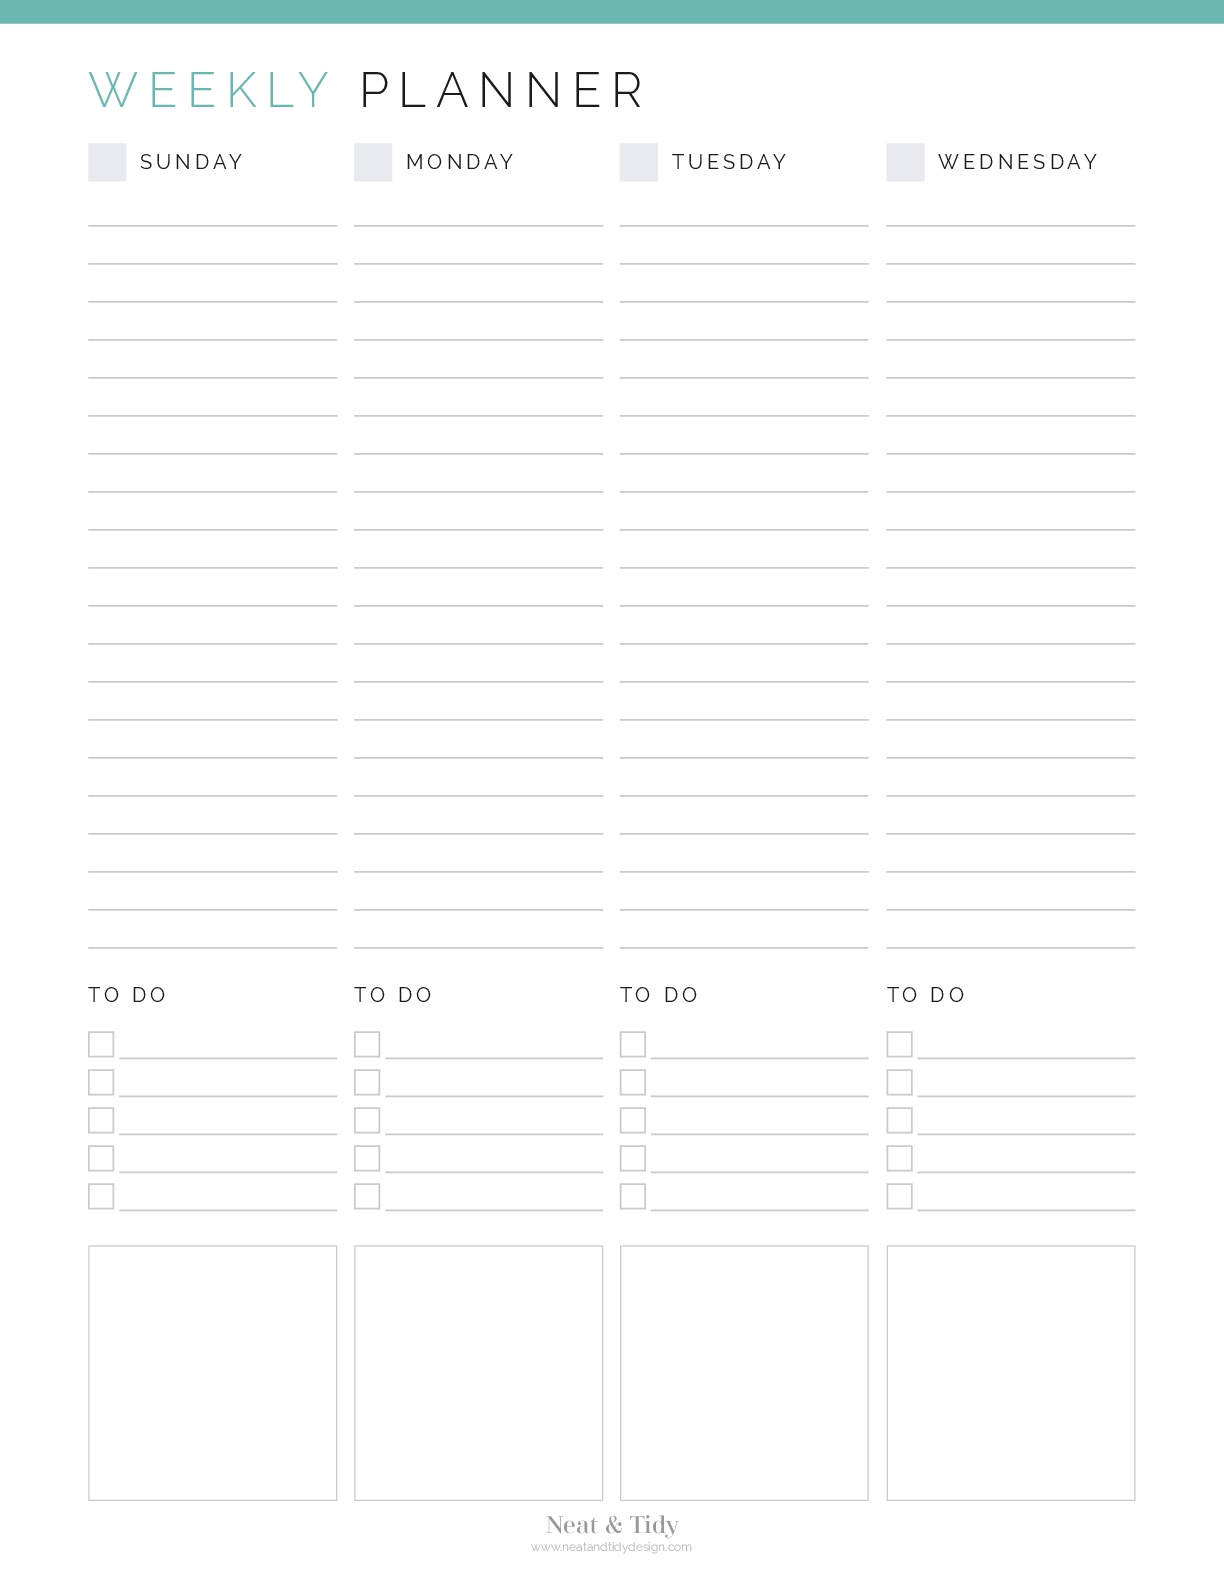 Weekly Appointment Planner - Neat and Tidy Design